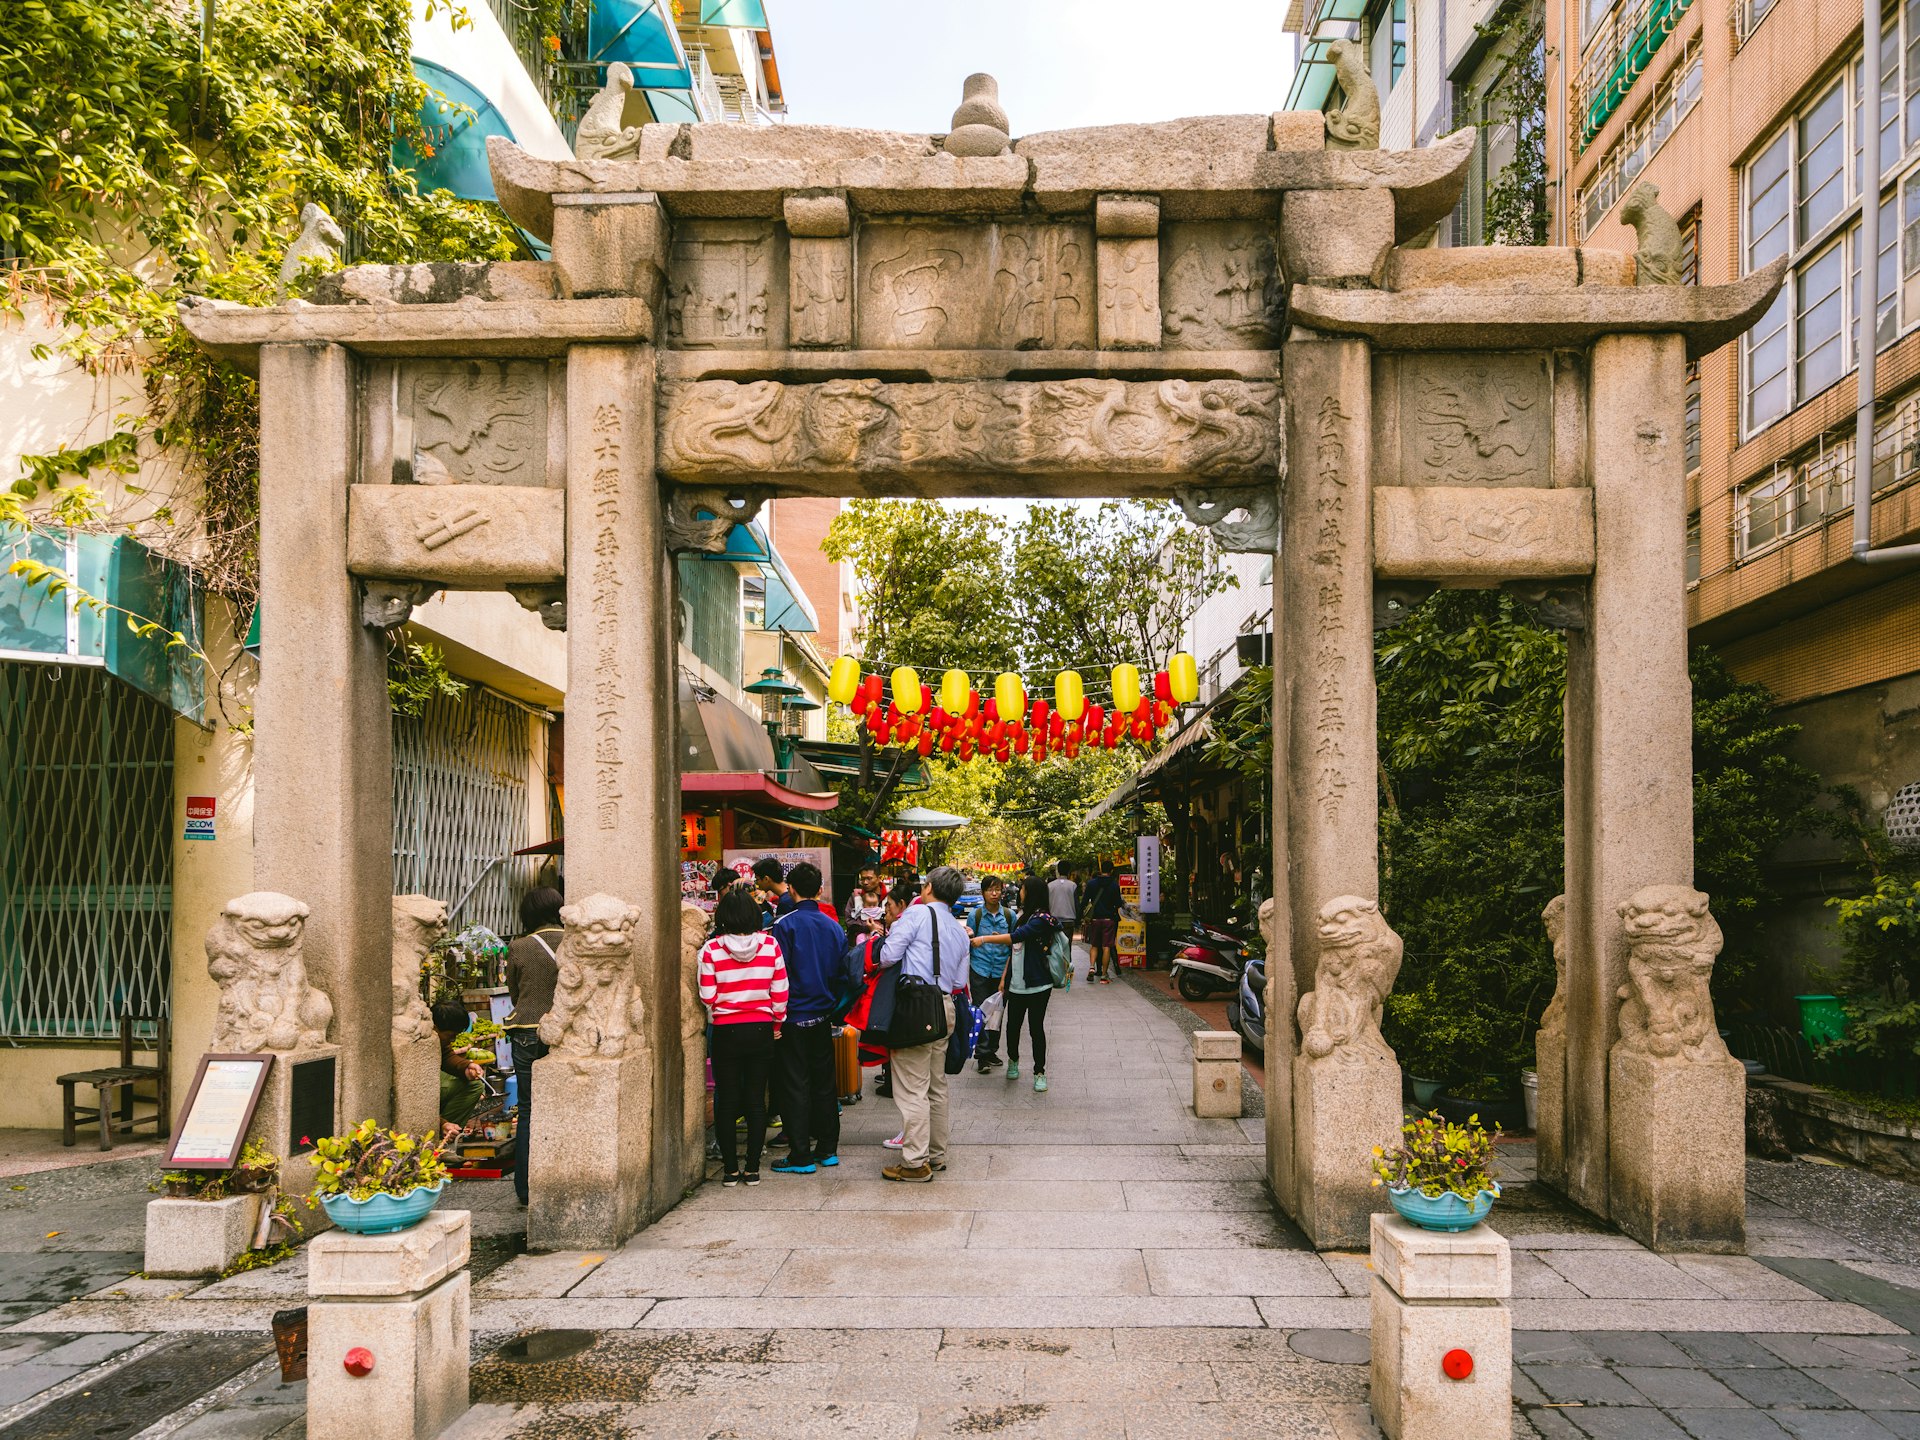 People stand near a stone gate at the entrance to a temple with yellow and red lanterns hanging above them